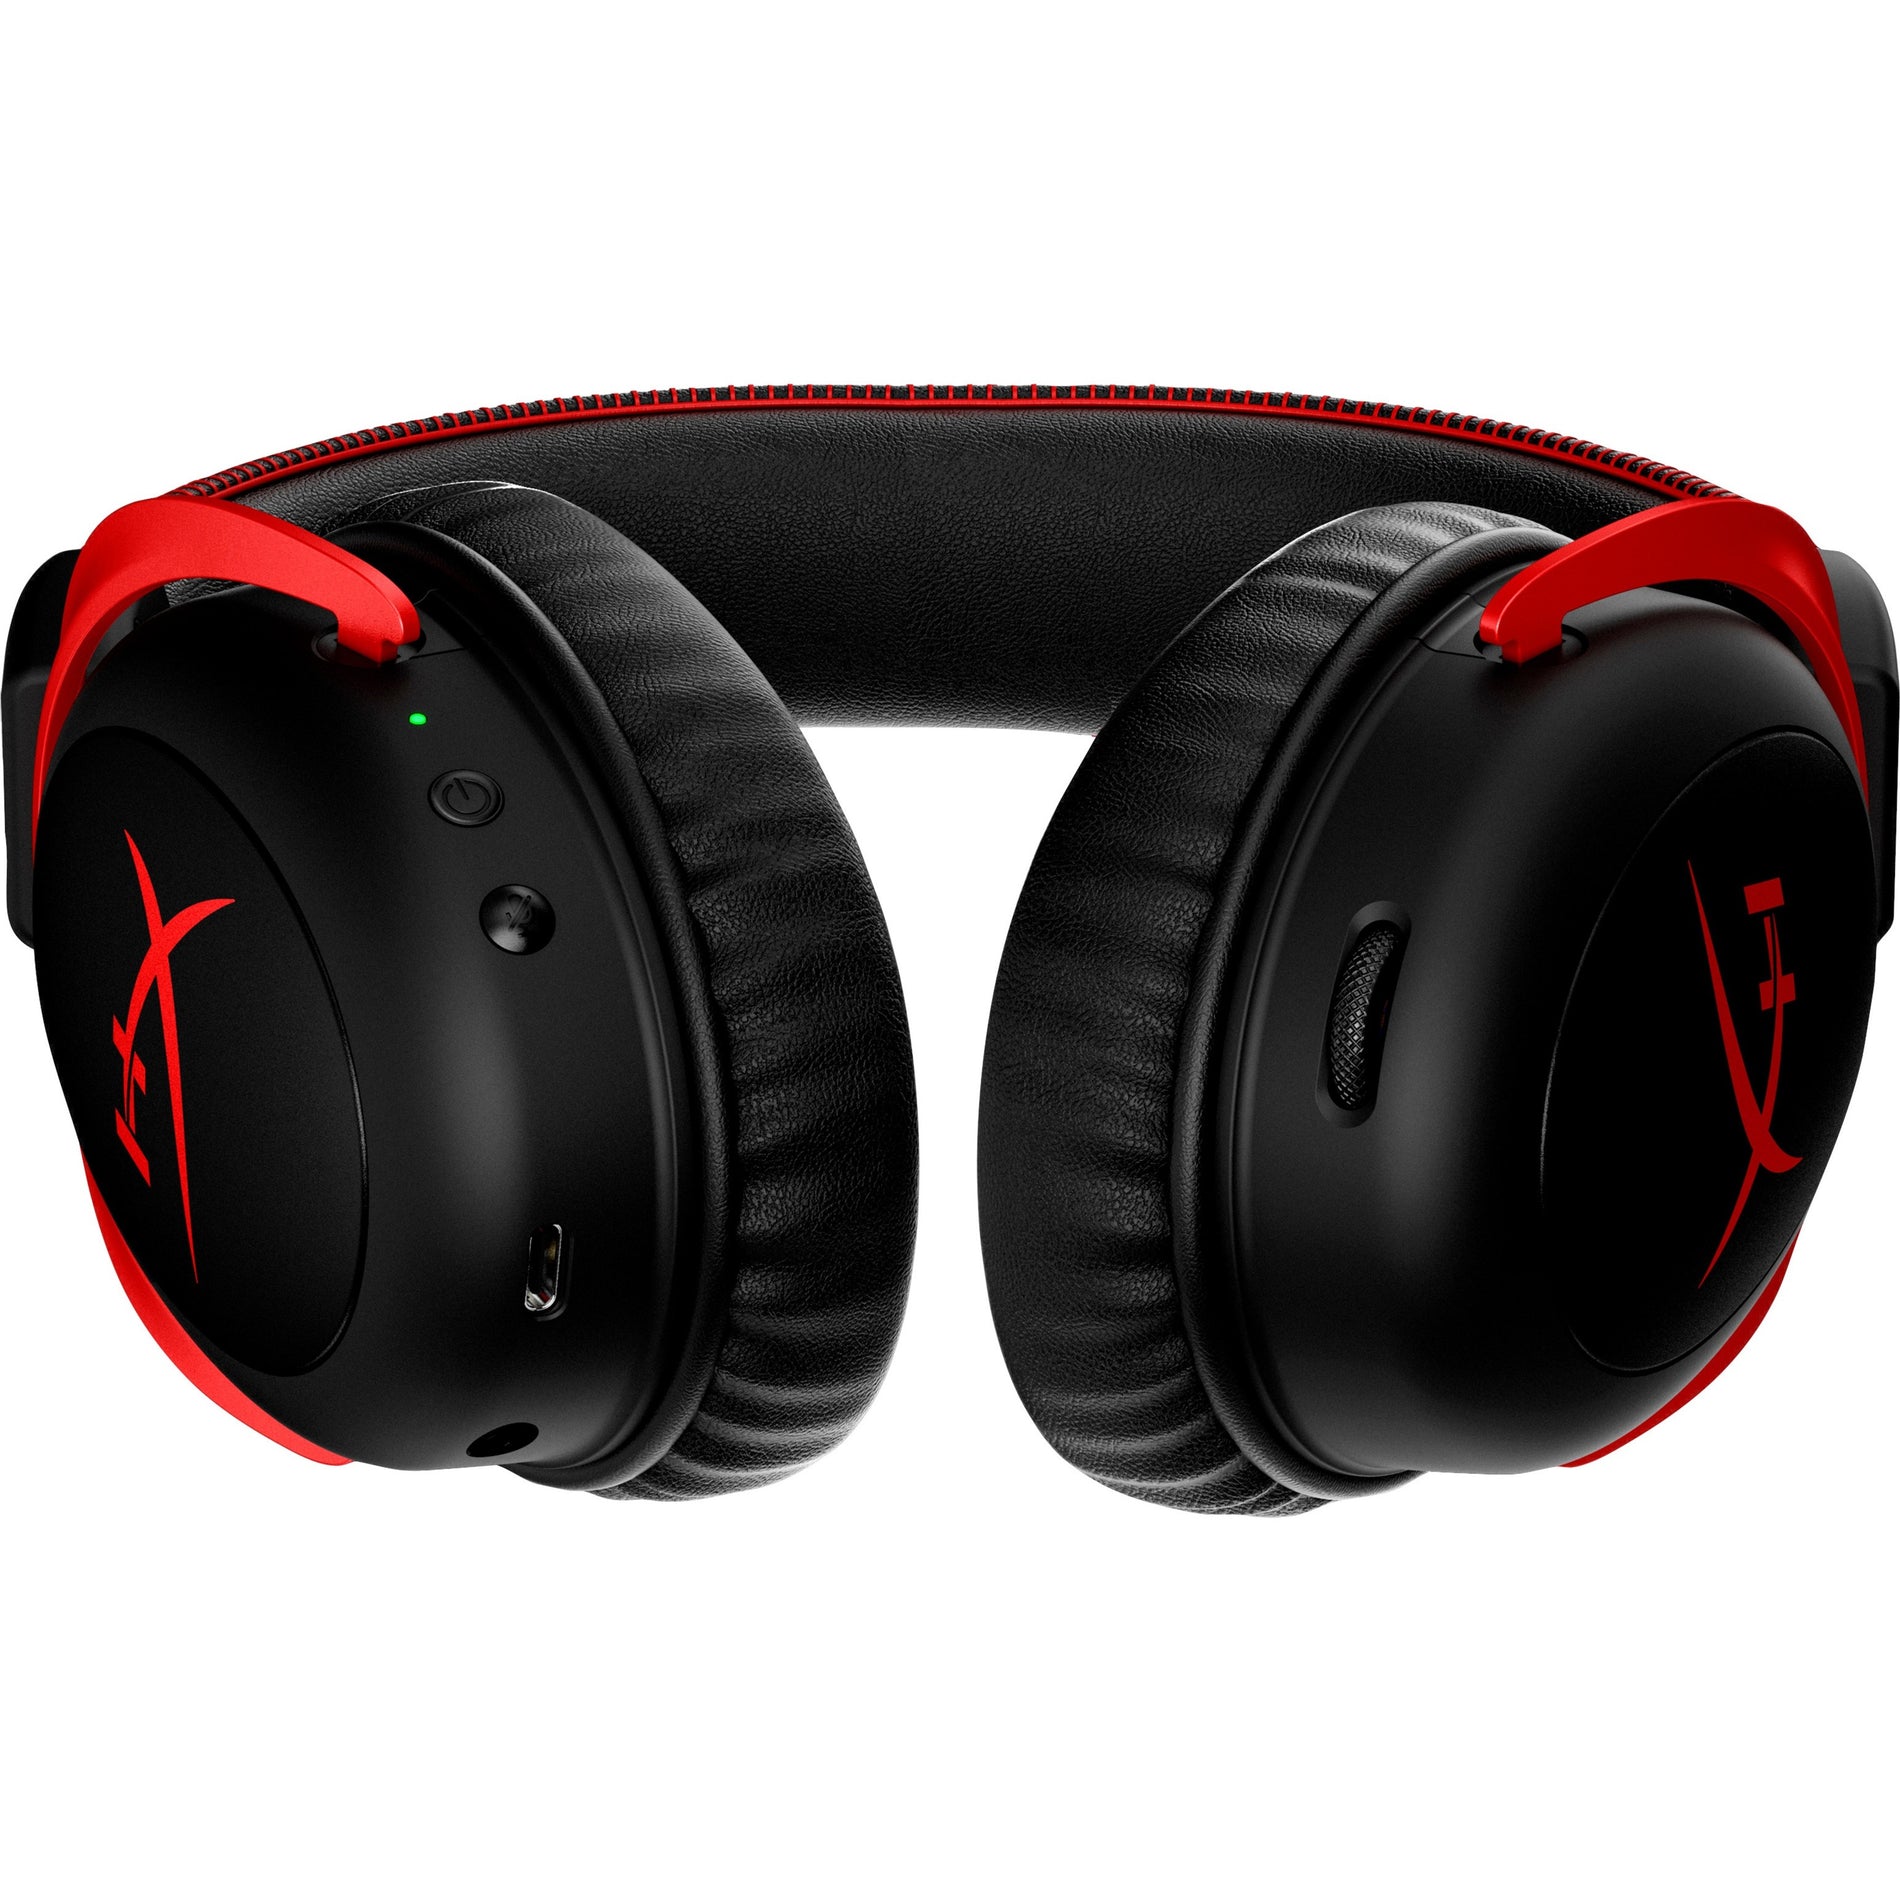 HyperX 4P5K4AA Cloud II Wireless Gaming Headset (Black-Red), Rechargeable Battery, 7.1 Surround Sound